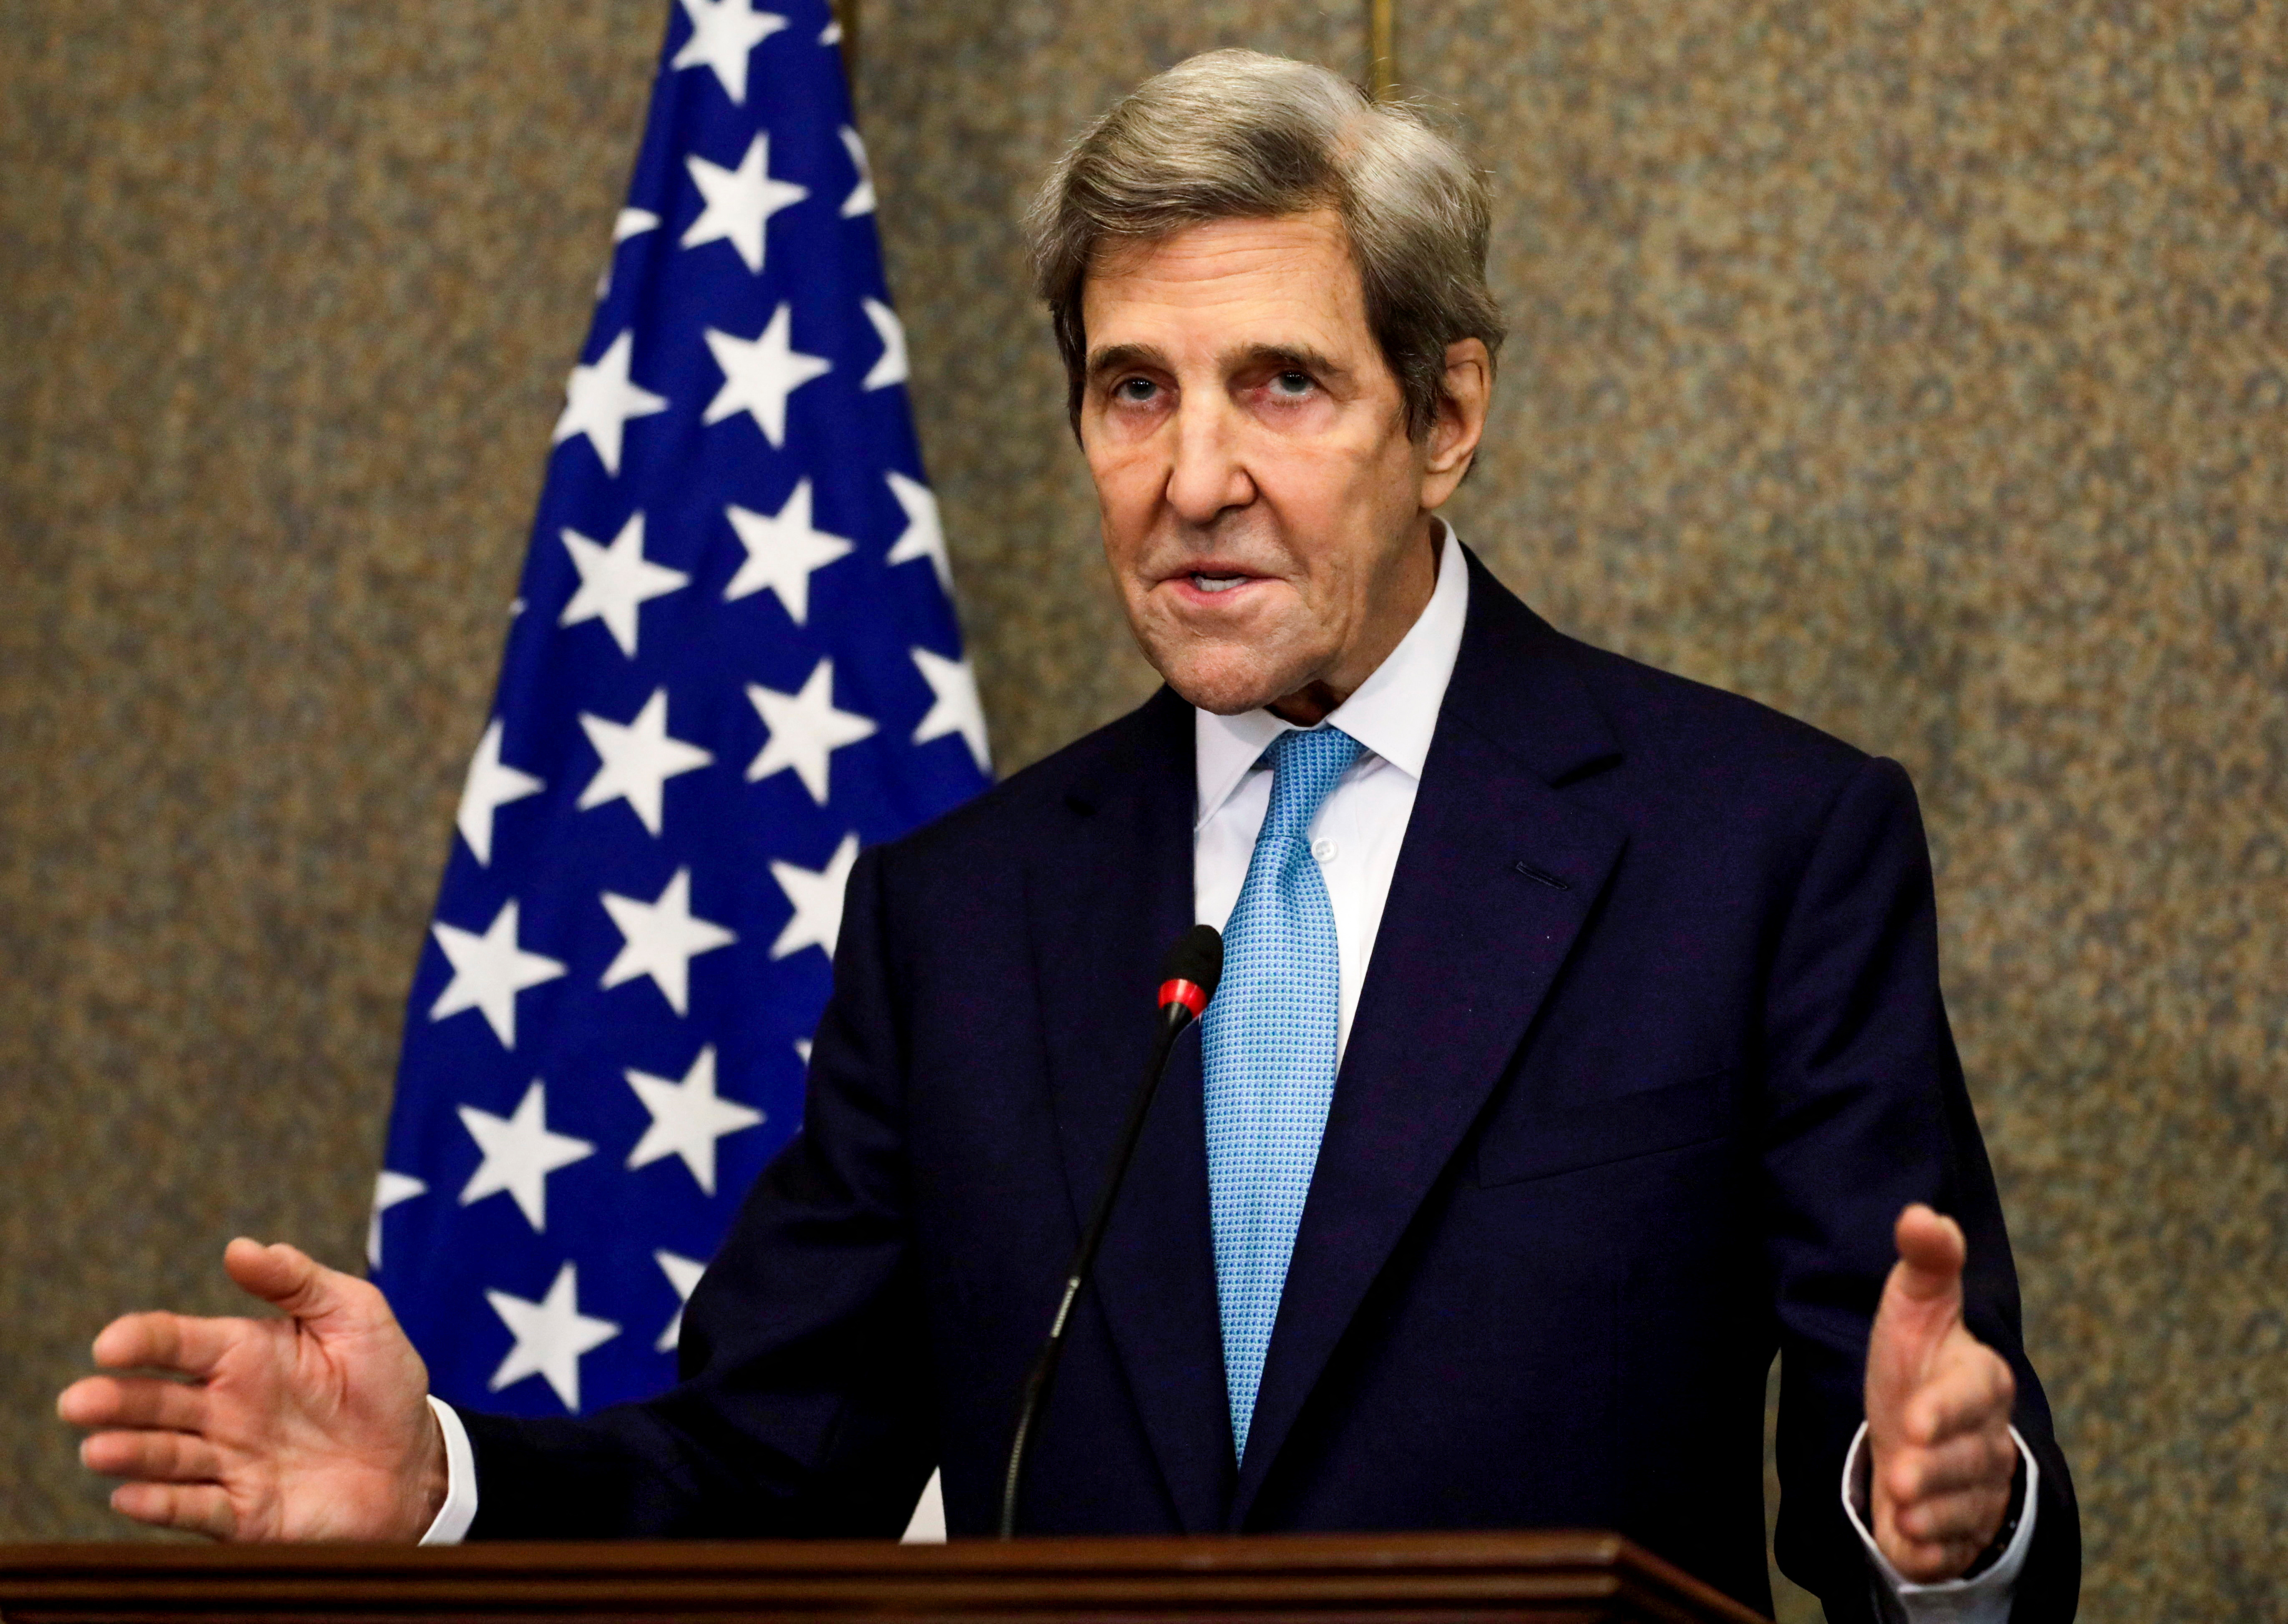 U.S. Special Presidential Envoy for Climate John Kerry speaks during a news conference with Egyptian Foreign Minister Sameh Shoukry, in Cairo